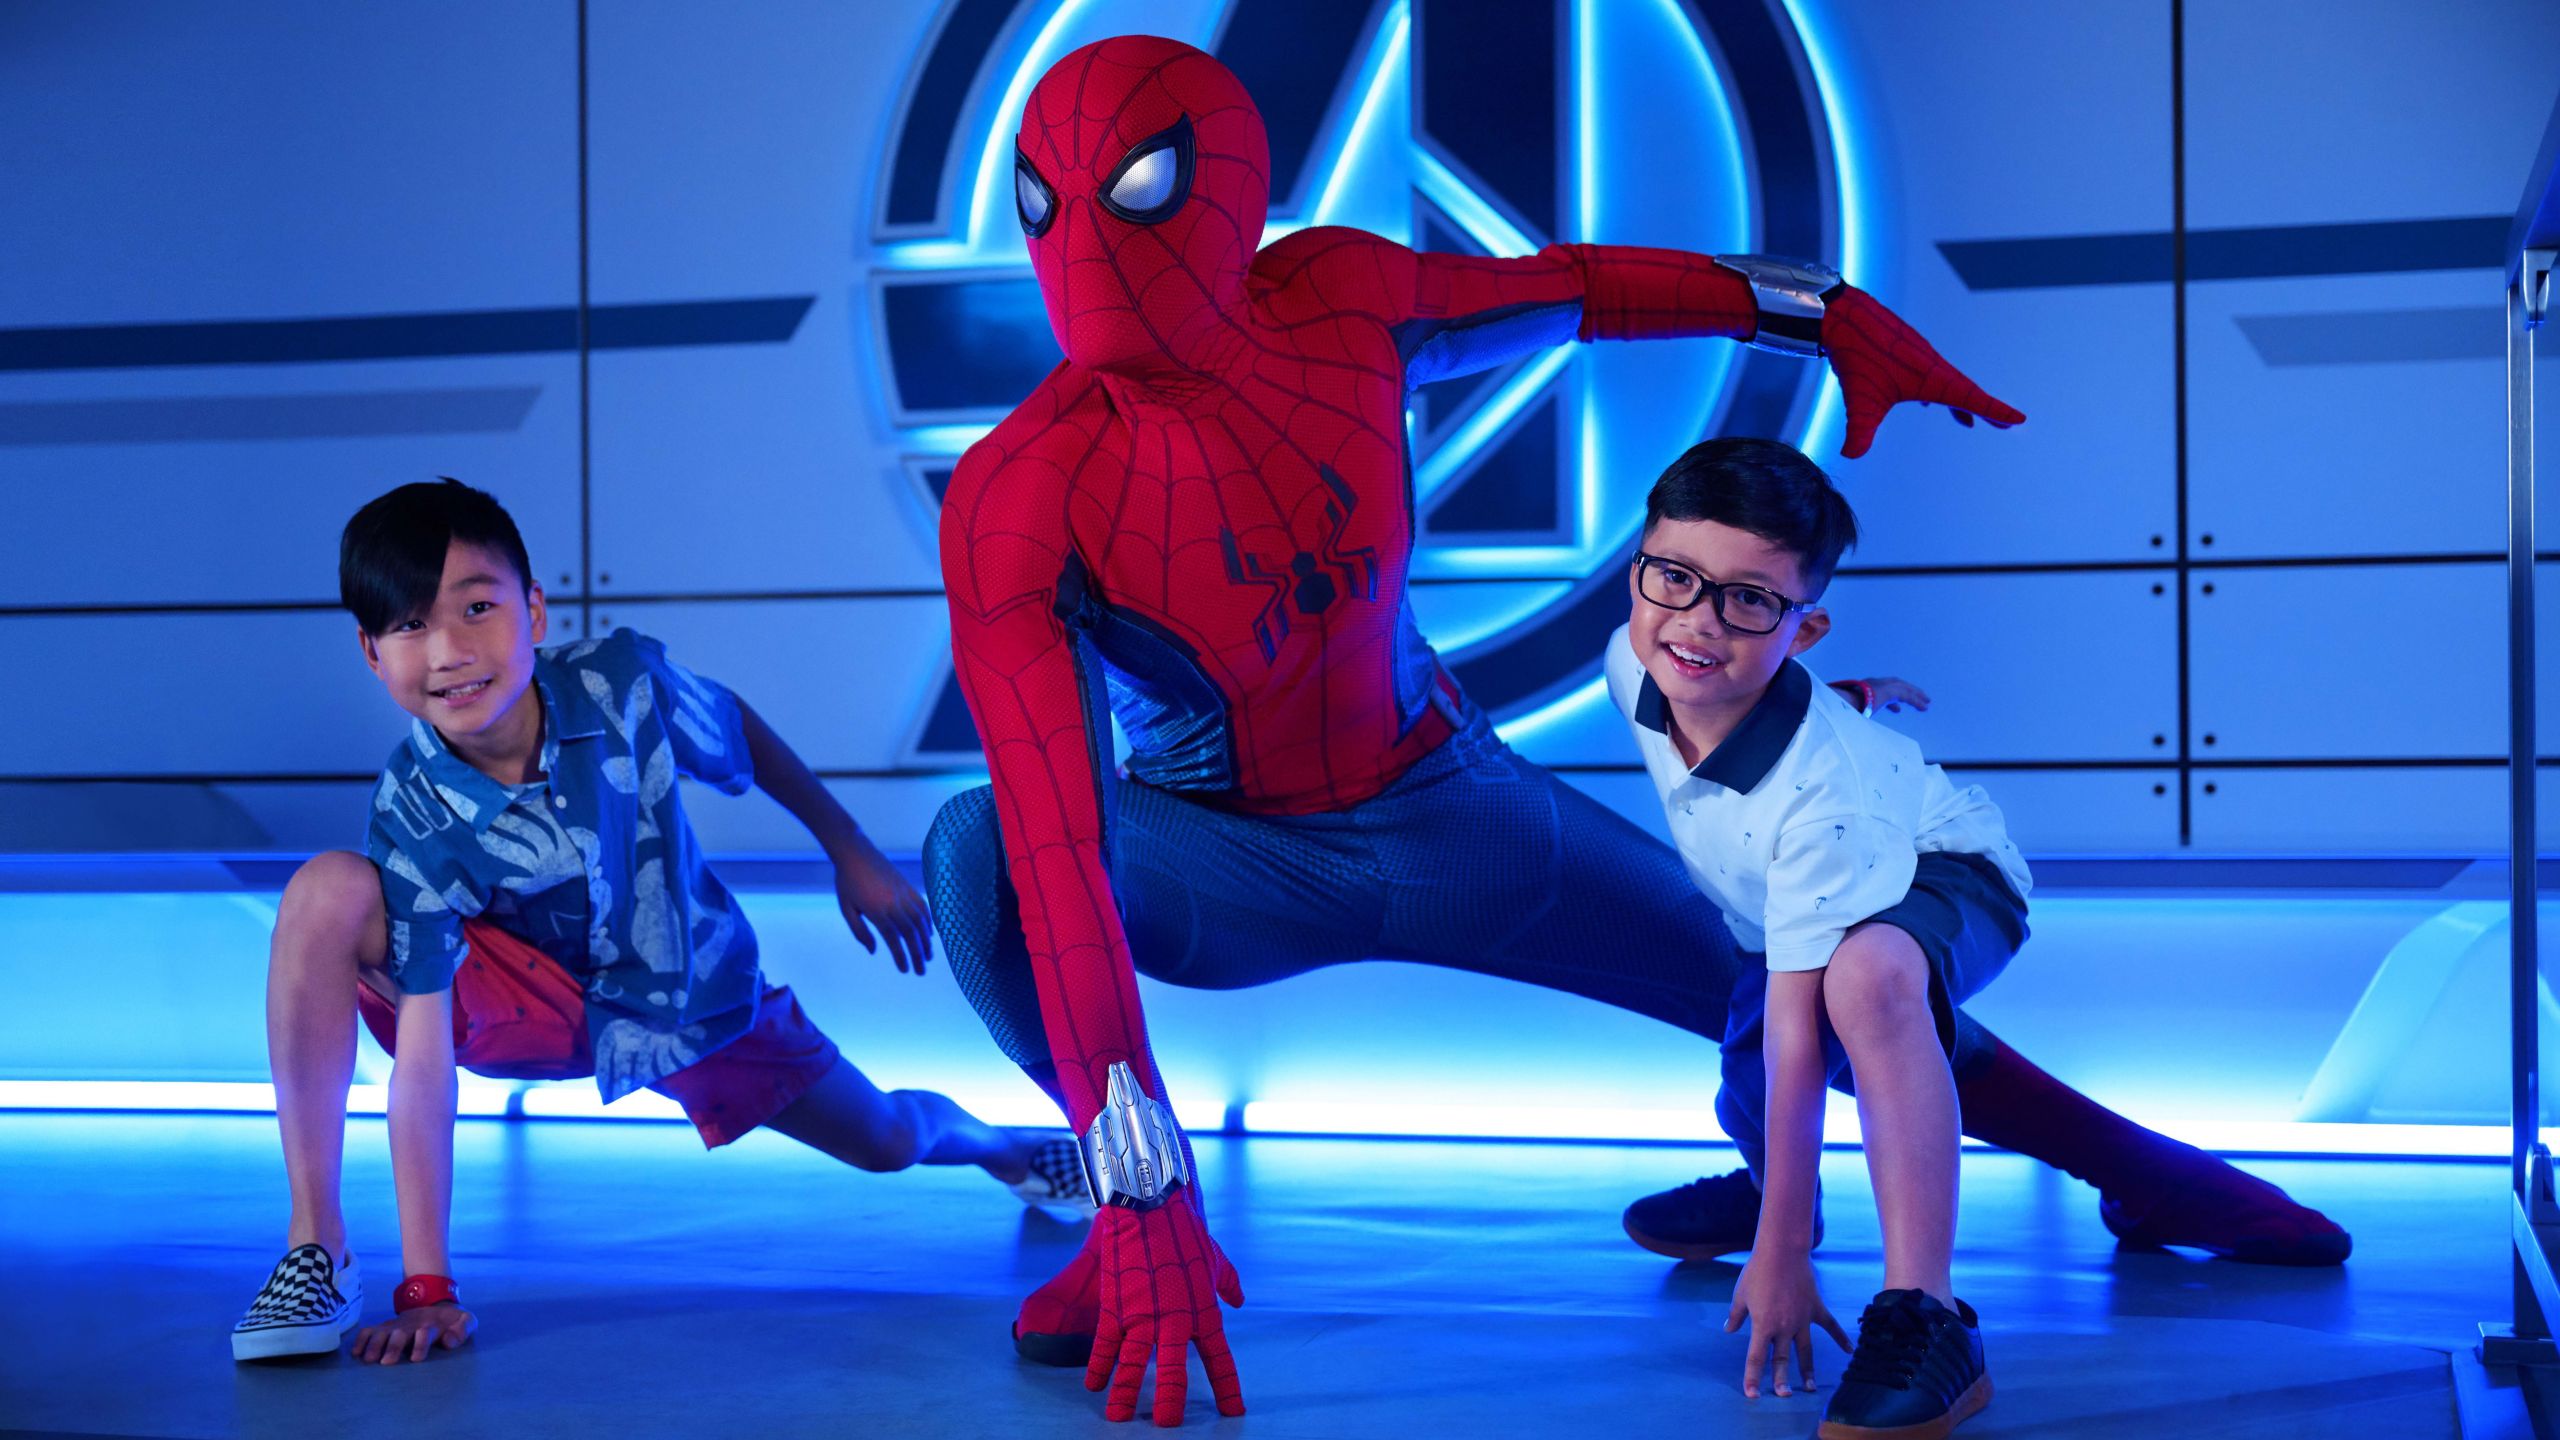 Two young boys and Spider Man posing together in front of an illuminated Avengers logo